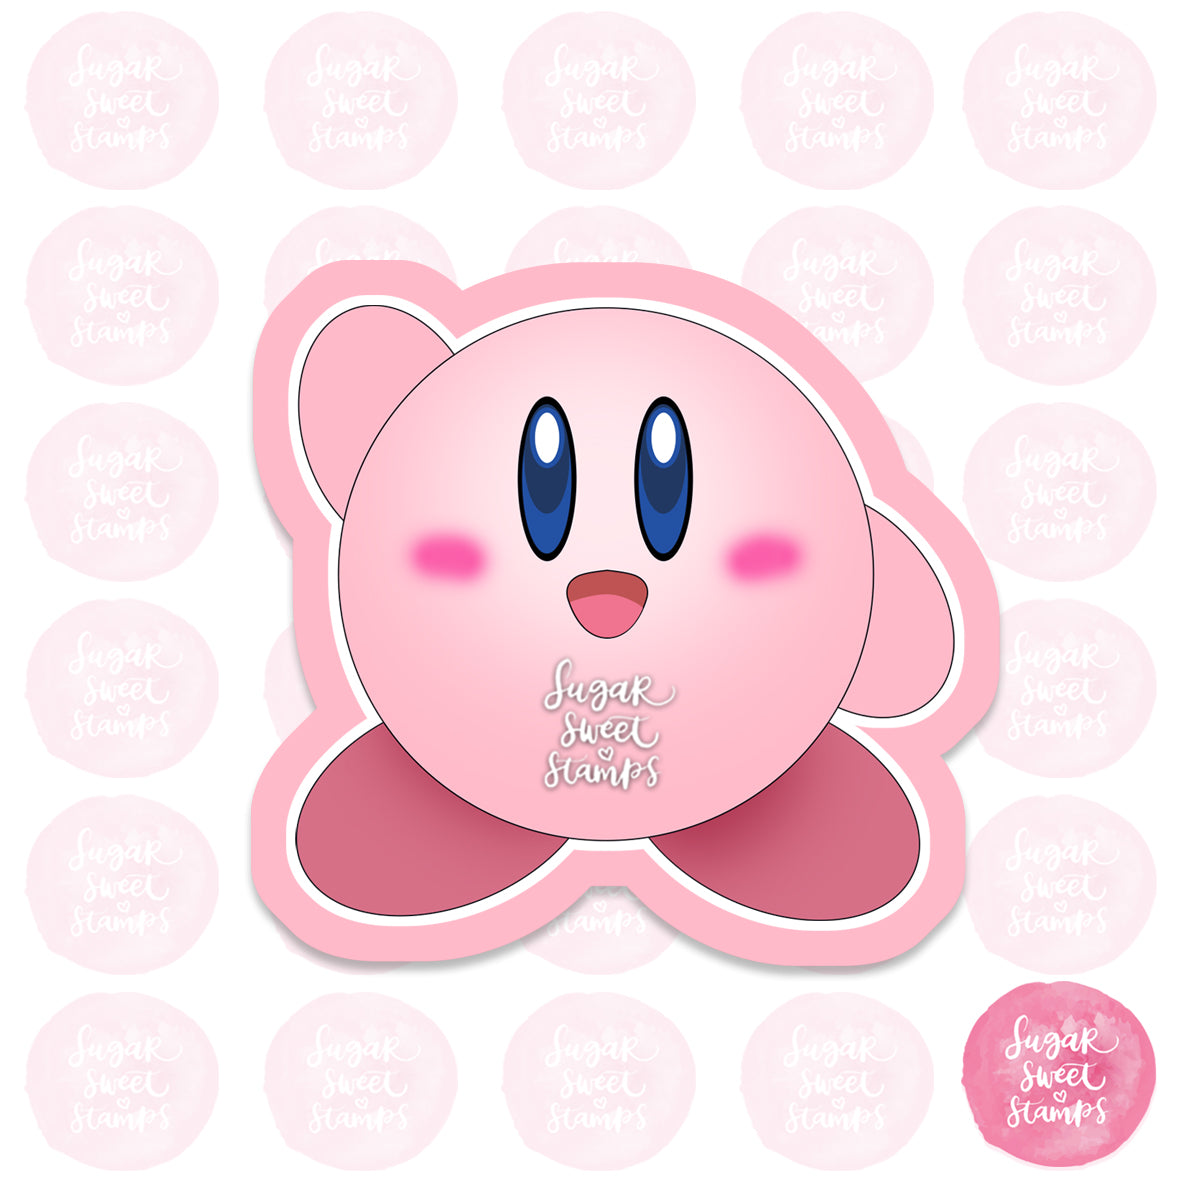 hungry pink ball creature video game character pop culture kirby pink custom 3d printed cookie cutter